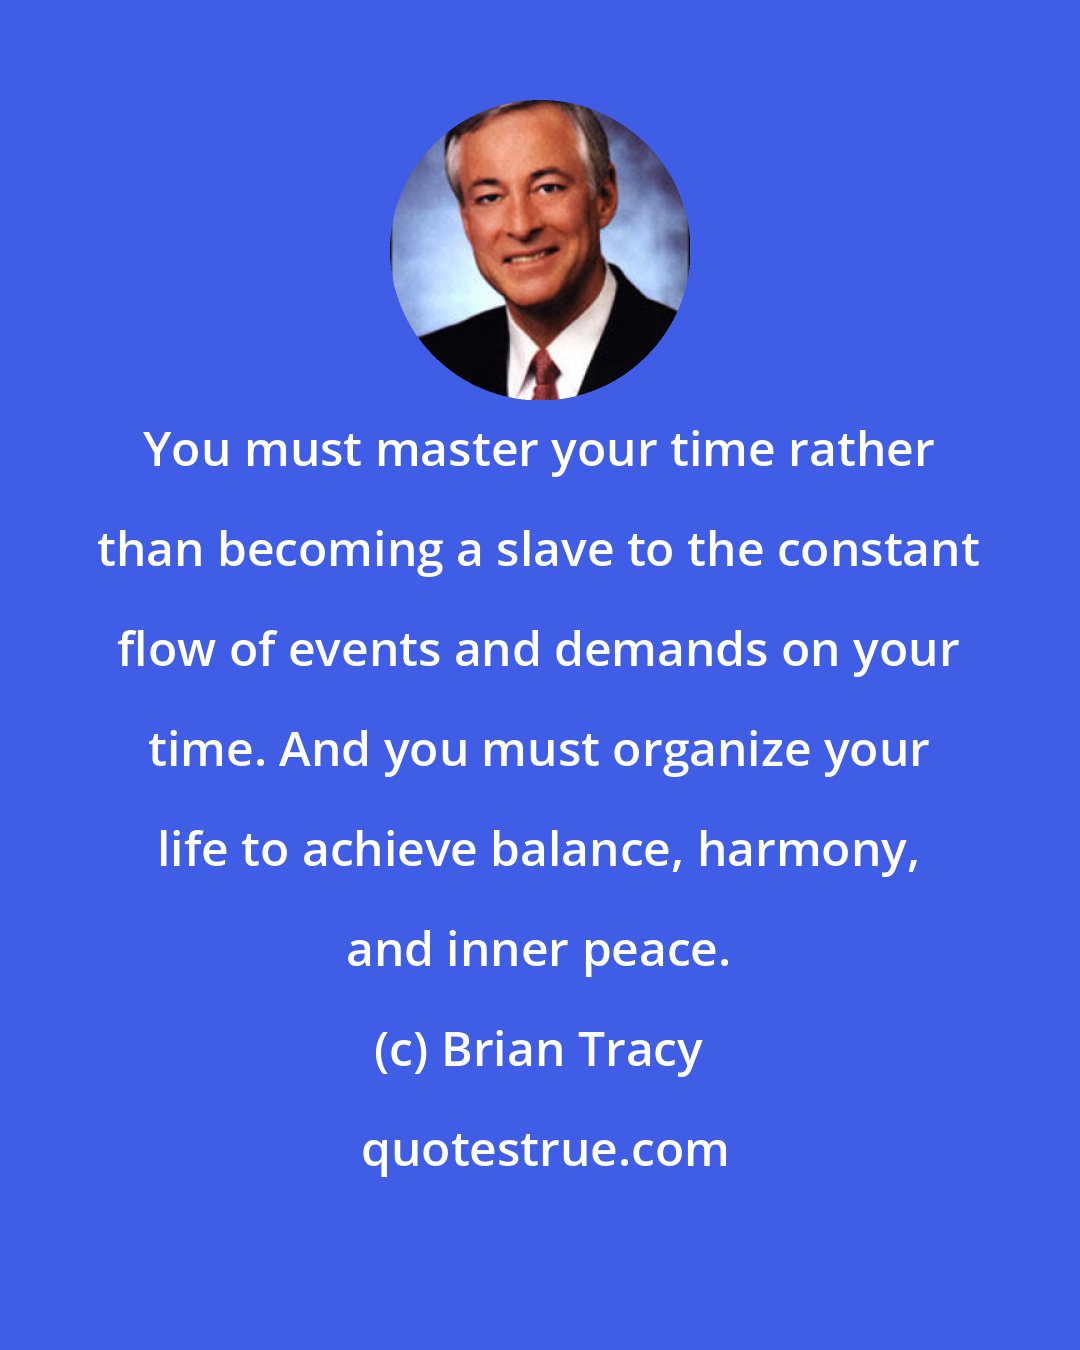 Brian Tracy: You must master your time rather than becoming a slave to the constant flow of events and demands on your time. And you must organize your life to achieve balance, harmony, and inner peace.